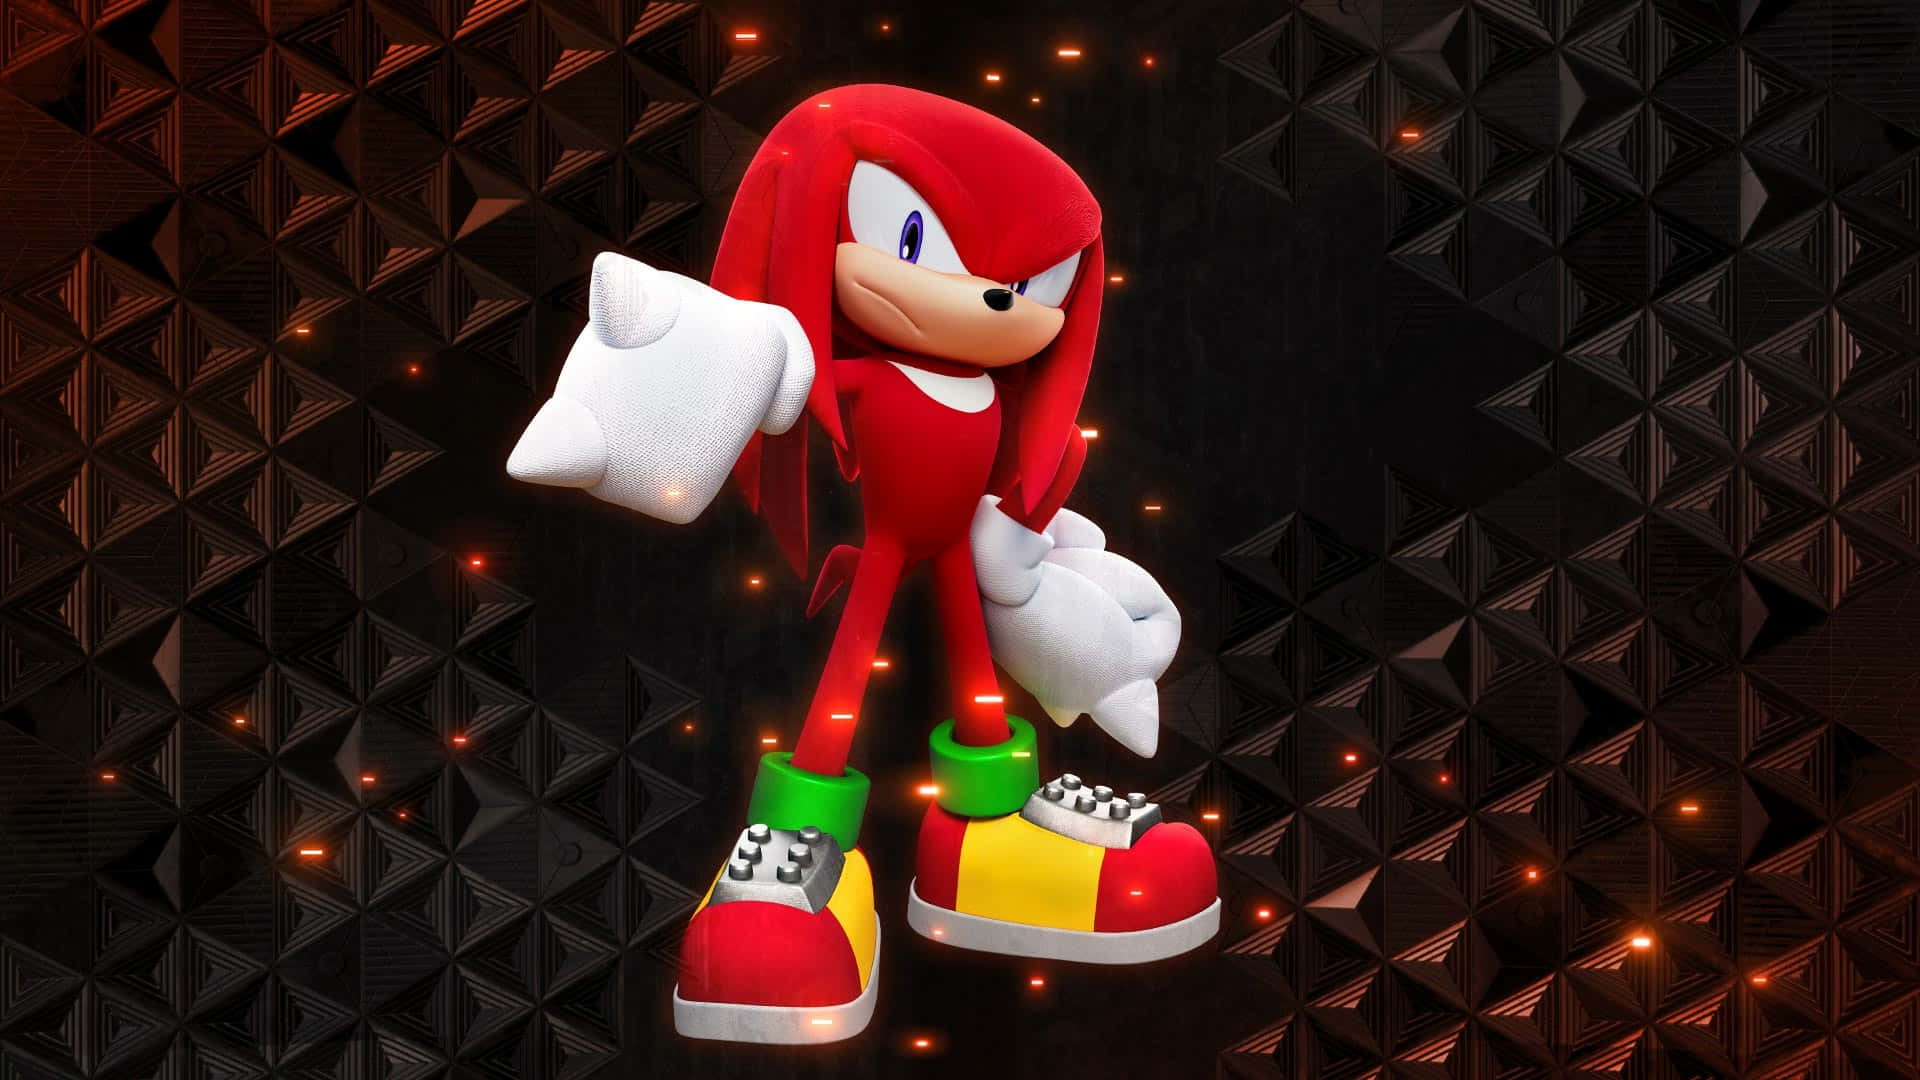 'Knuckles the Echidna from the Sonic the Hedgehog Franchise' Wallpaper